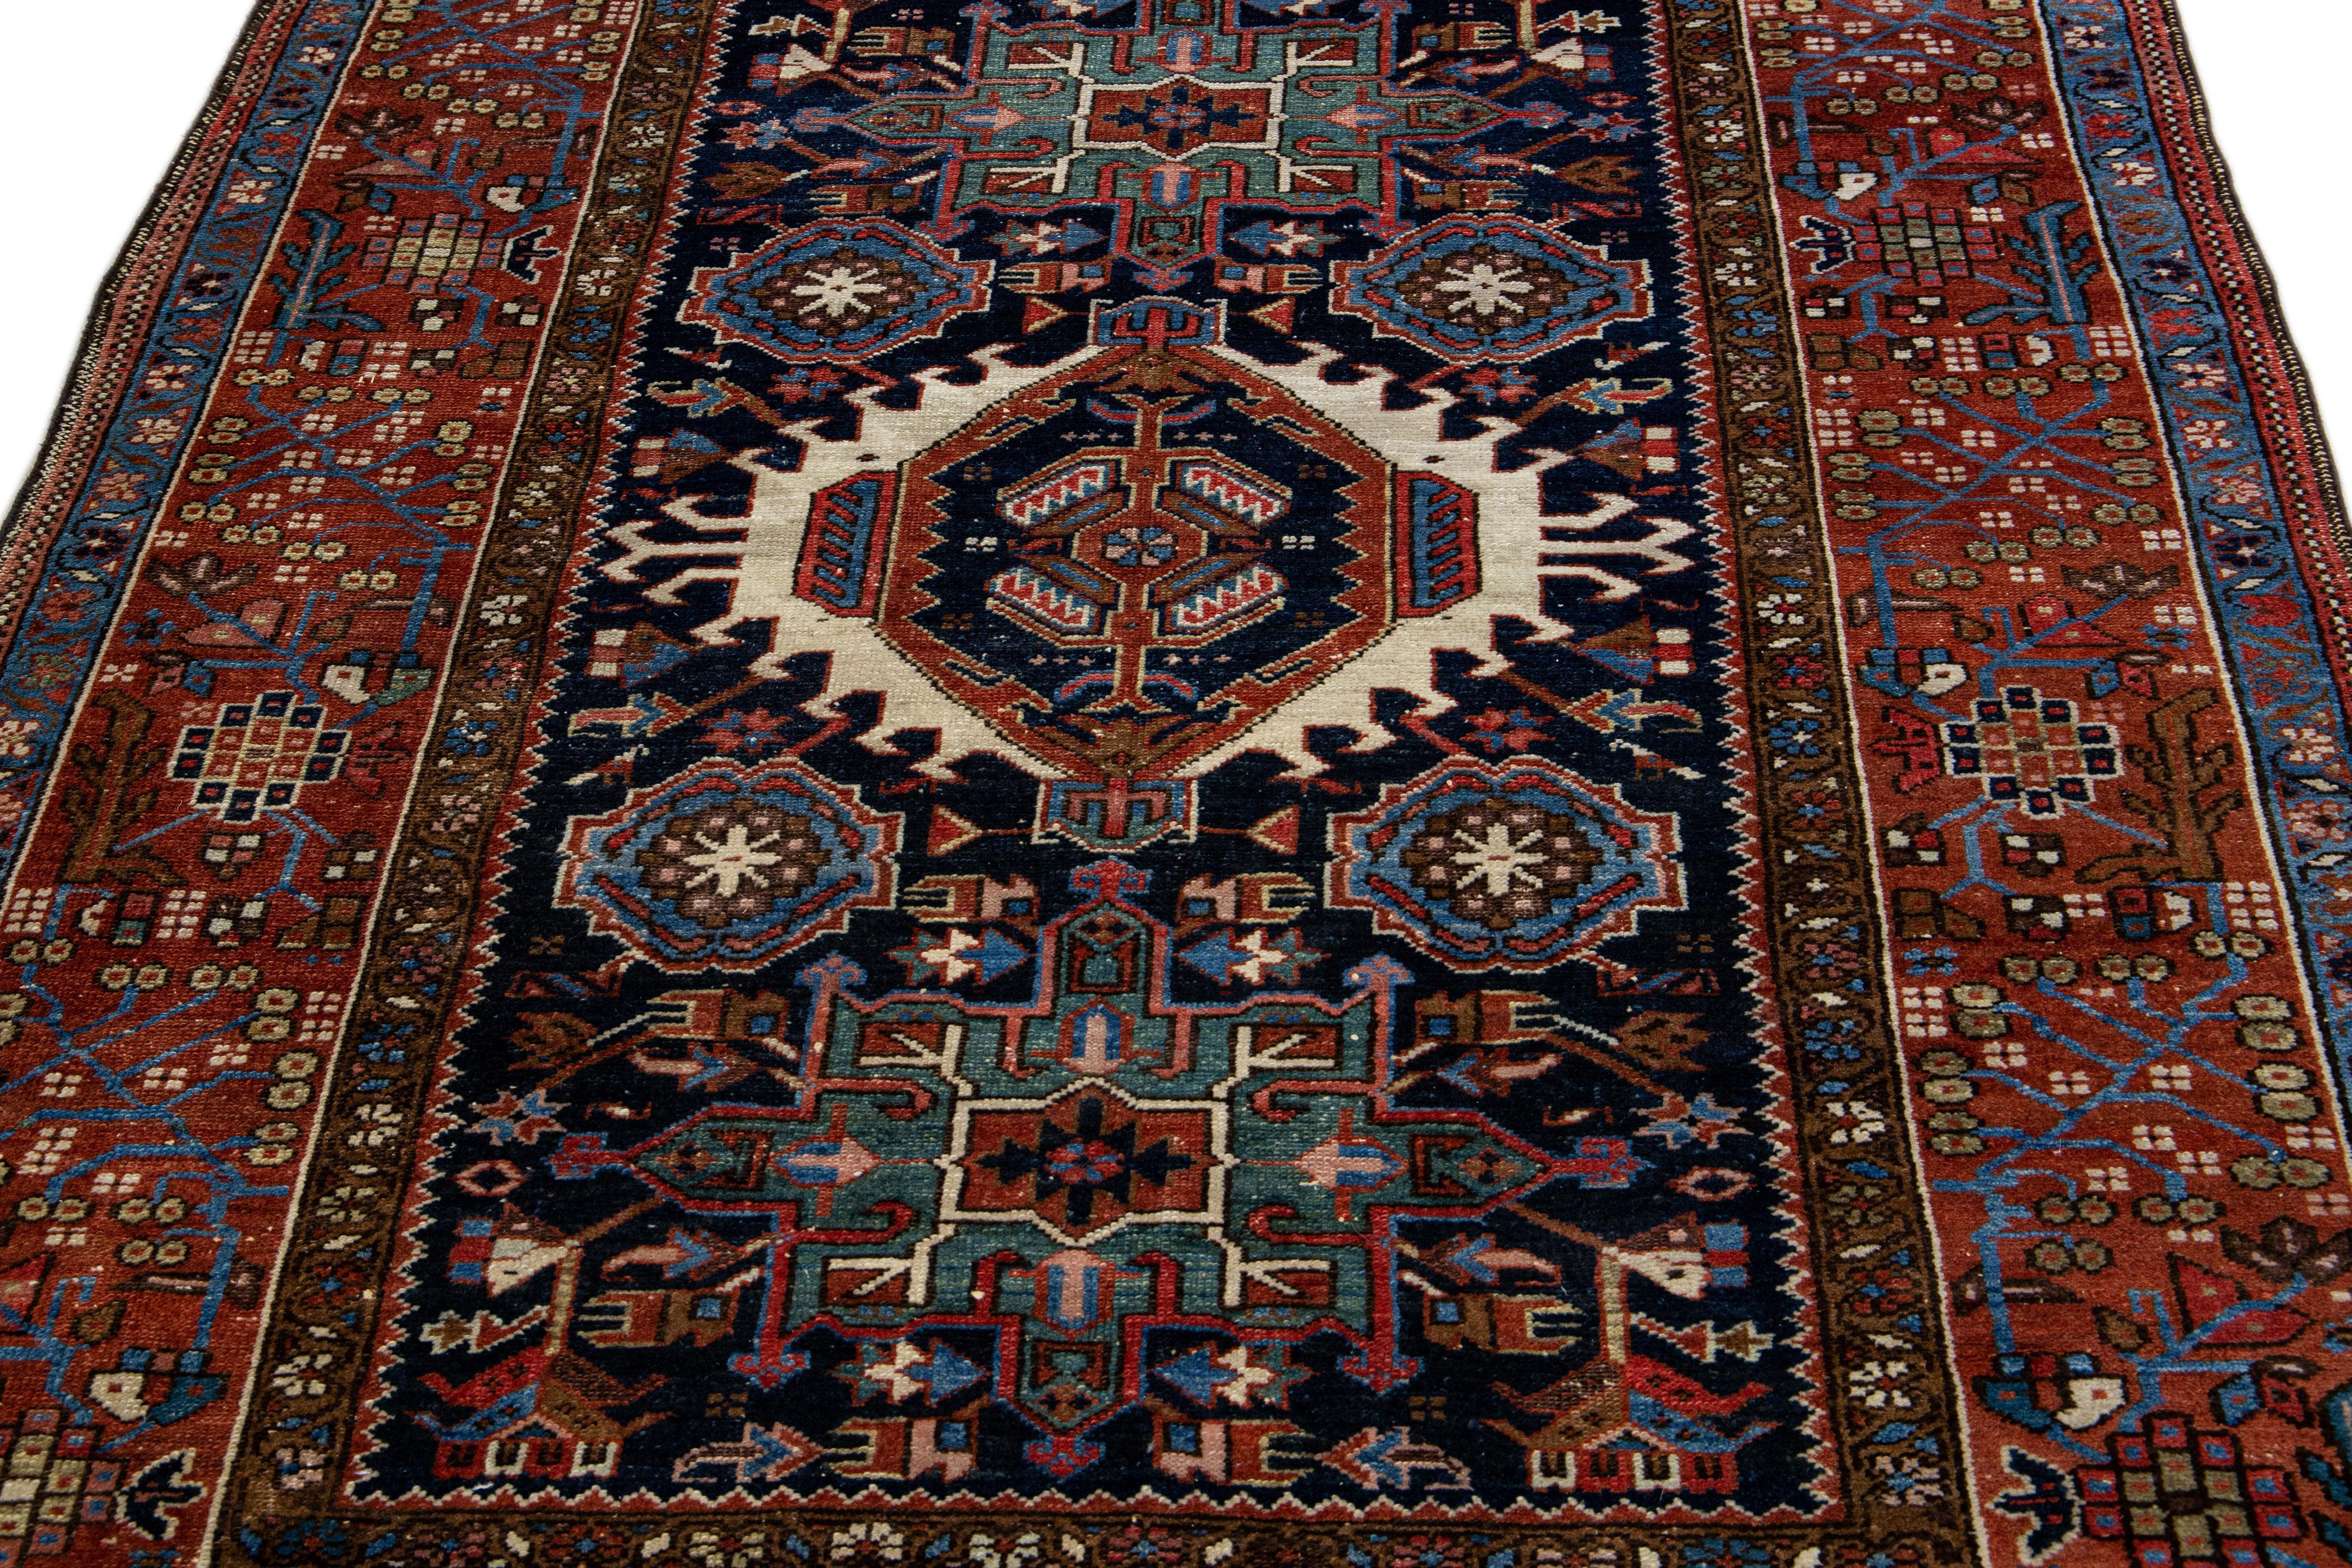 Beautiful antique Heriz hand-knotted wool rug with a navy blue color field. This Persian rug has multicolor accents in a gorgeous all-over medallion floral motif.

This rug measures: 4'11